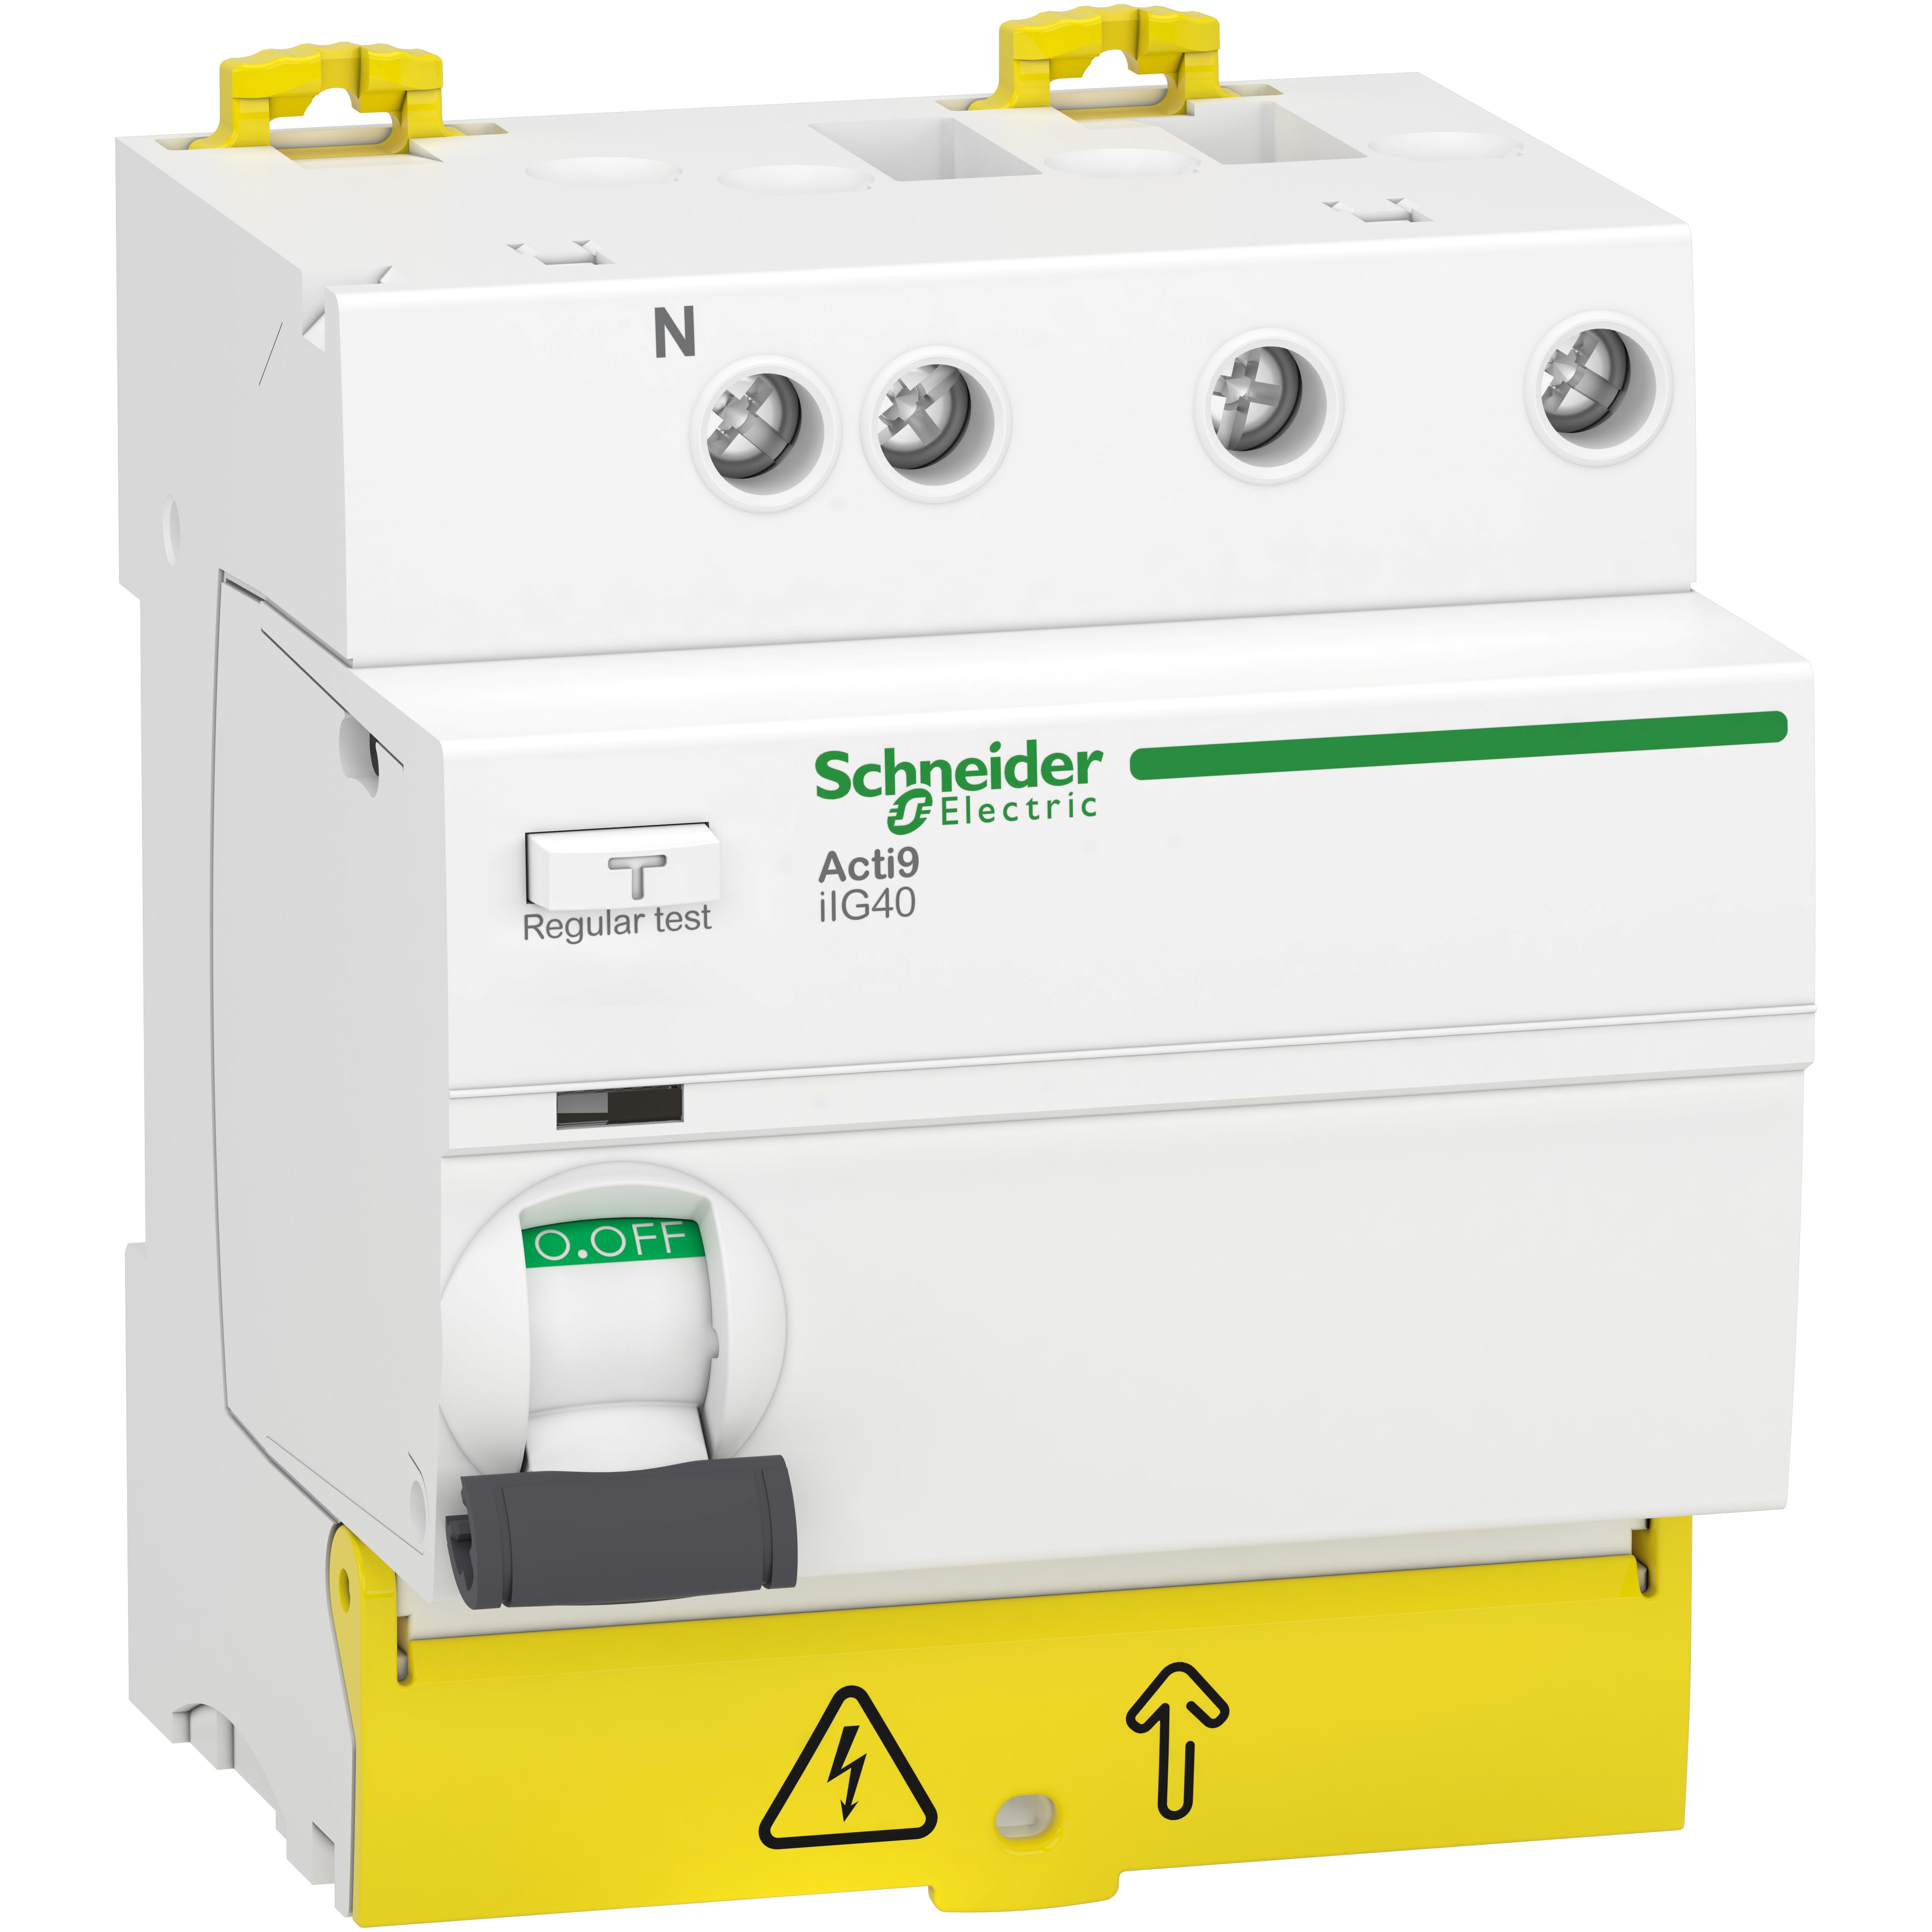 Schneider Electric - Acti9 iIG40 - Inter. diff tete de groupe - 3P+N - 40A - 30mA - Type AC